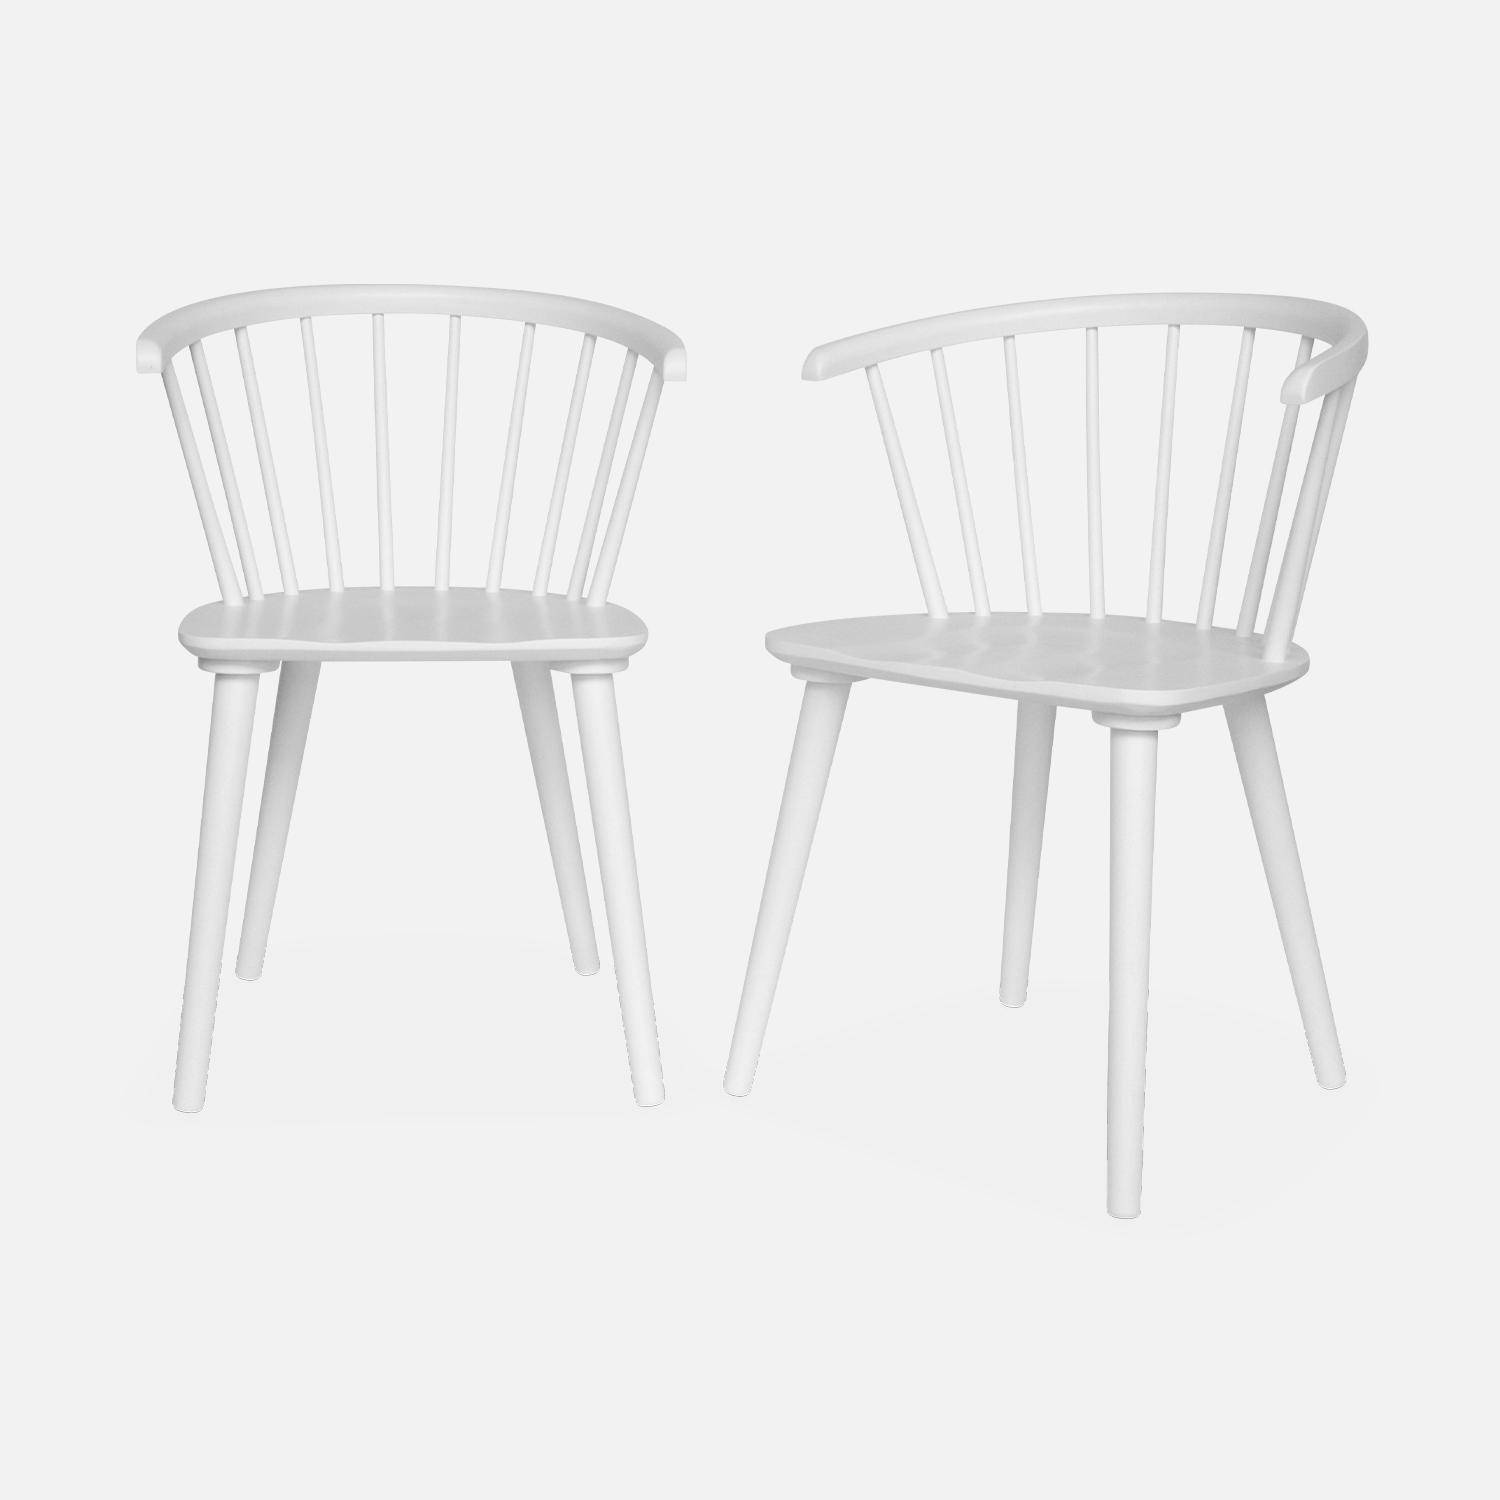 Pair of Wood and Plywood Spindle Chairs, white, L53 x W47.5 x H76cm,sweeek,Photo3